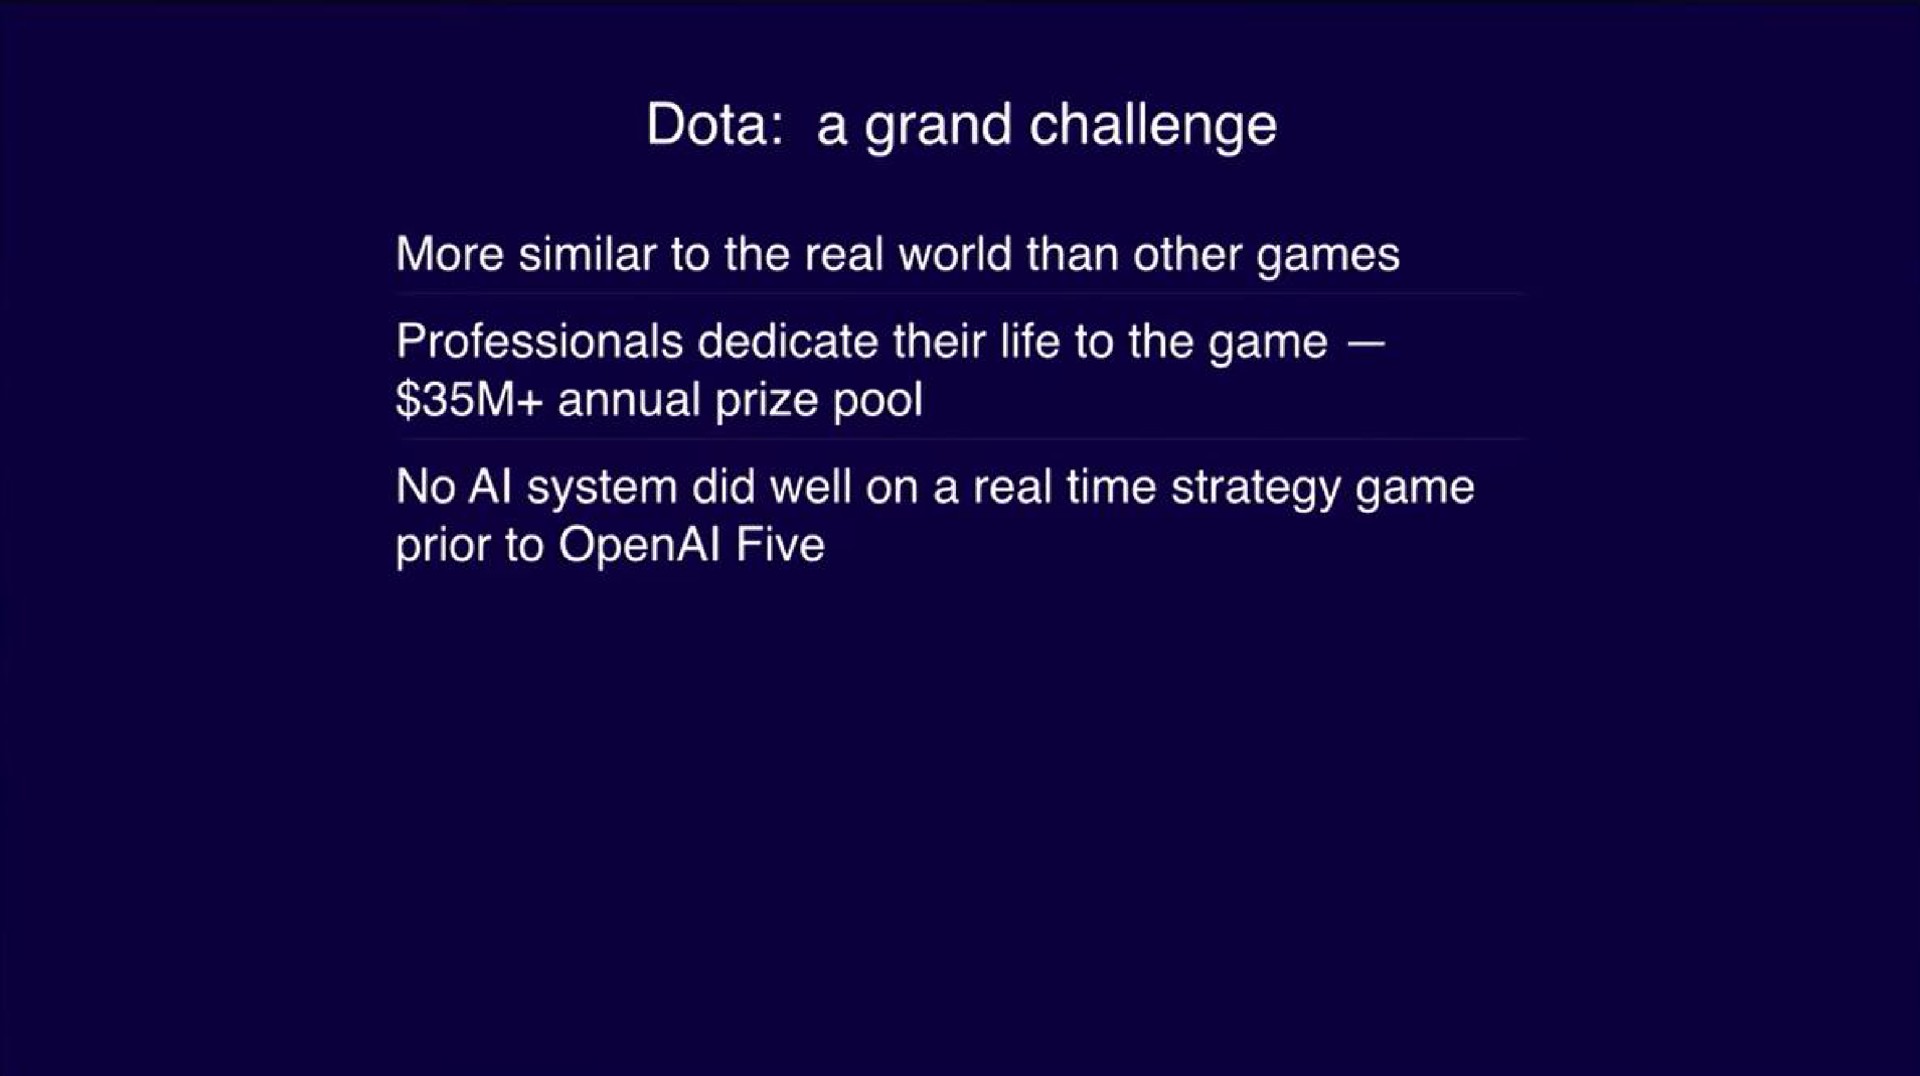 a grand challenge more similar to the real world than other games professionals dedicate their life to the game annual prize pool no system did well on a real time strategy game prior to five | OpenAI